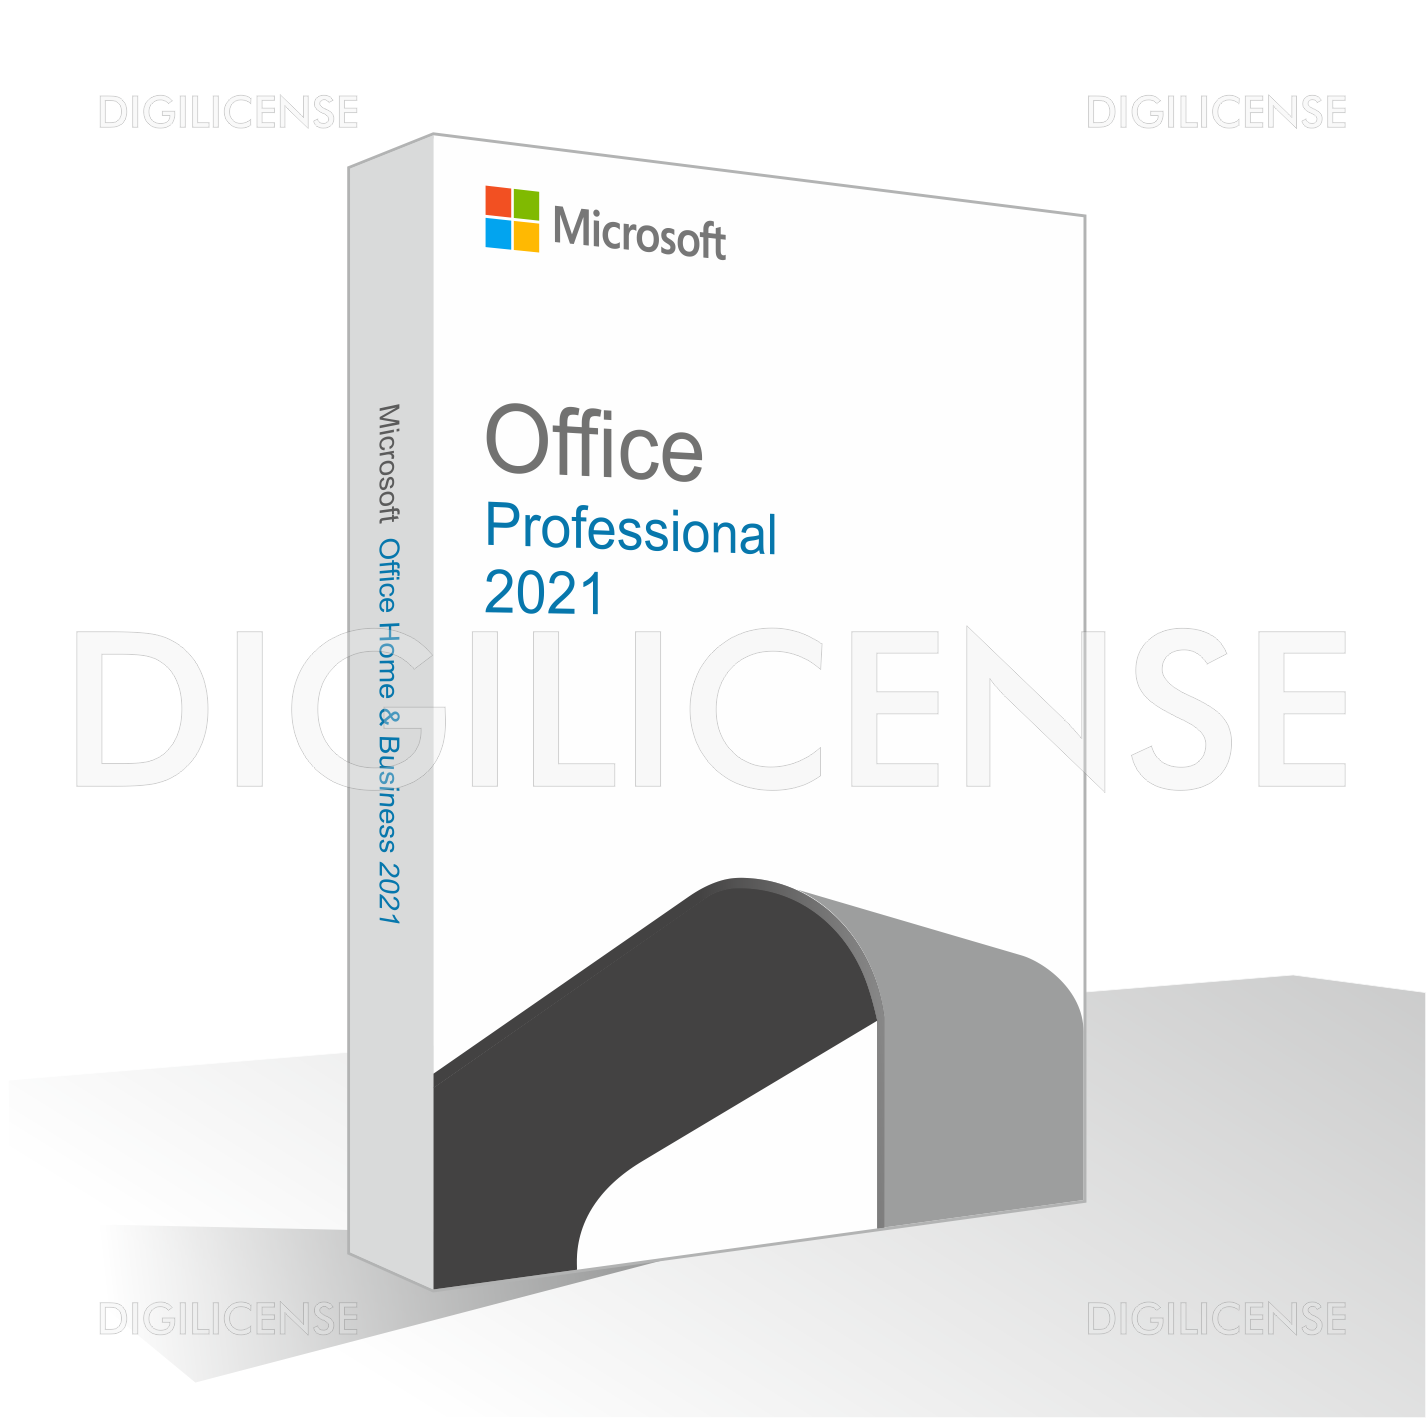 Microsoft Office 2021 Professional - 1 device - Perpetual